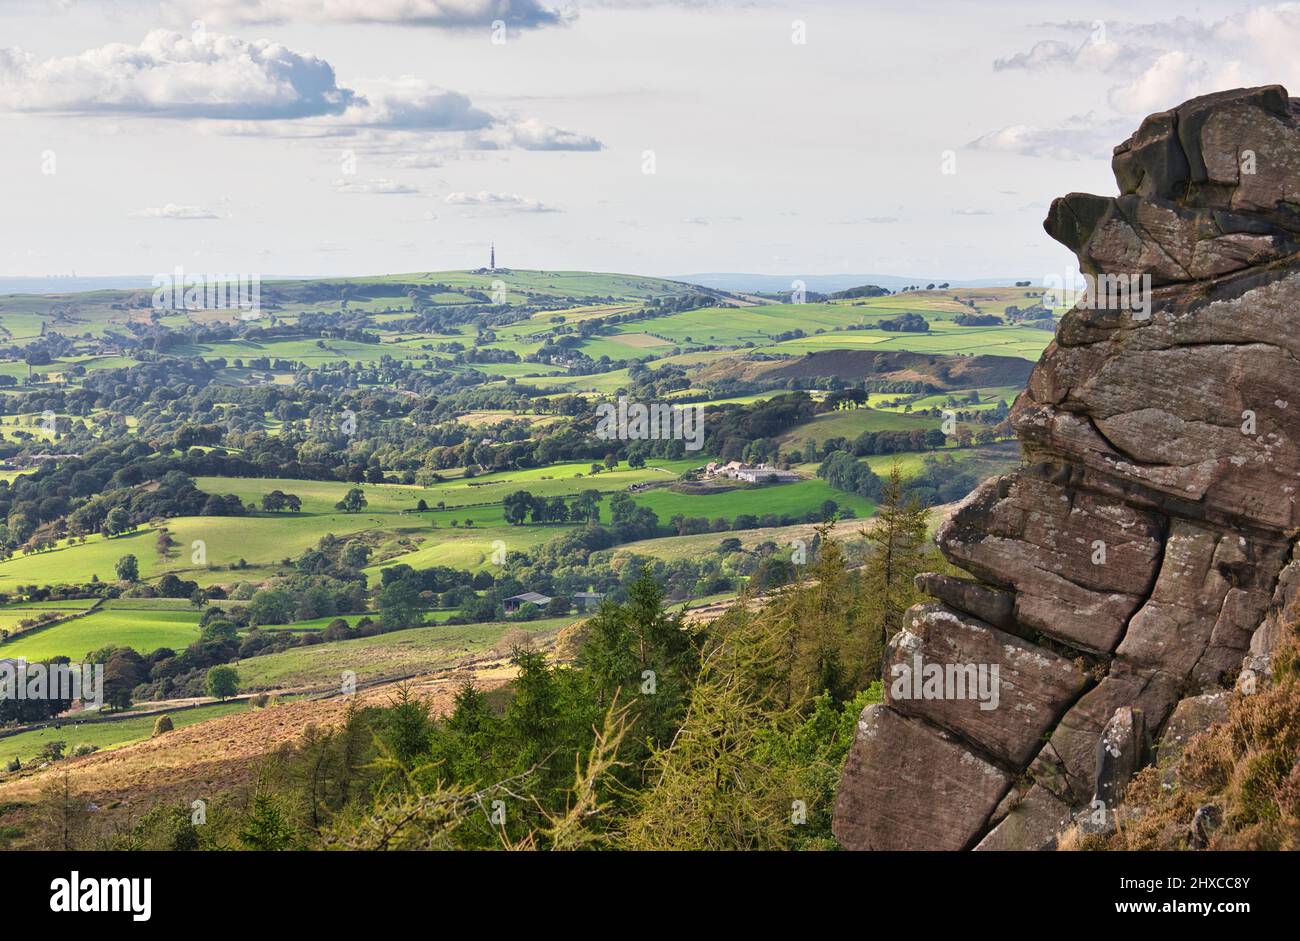 Panorama from The Roaches gritstone escarpment, Peak District National Park, Staffordshire, England Stock Photo